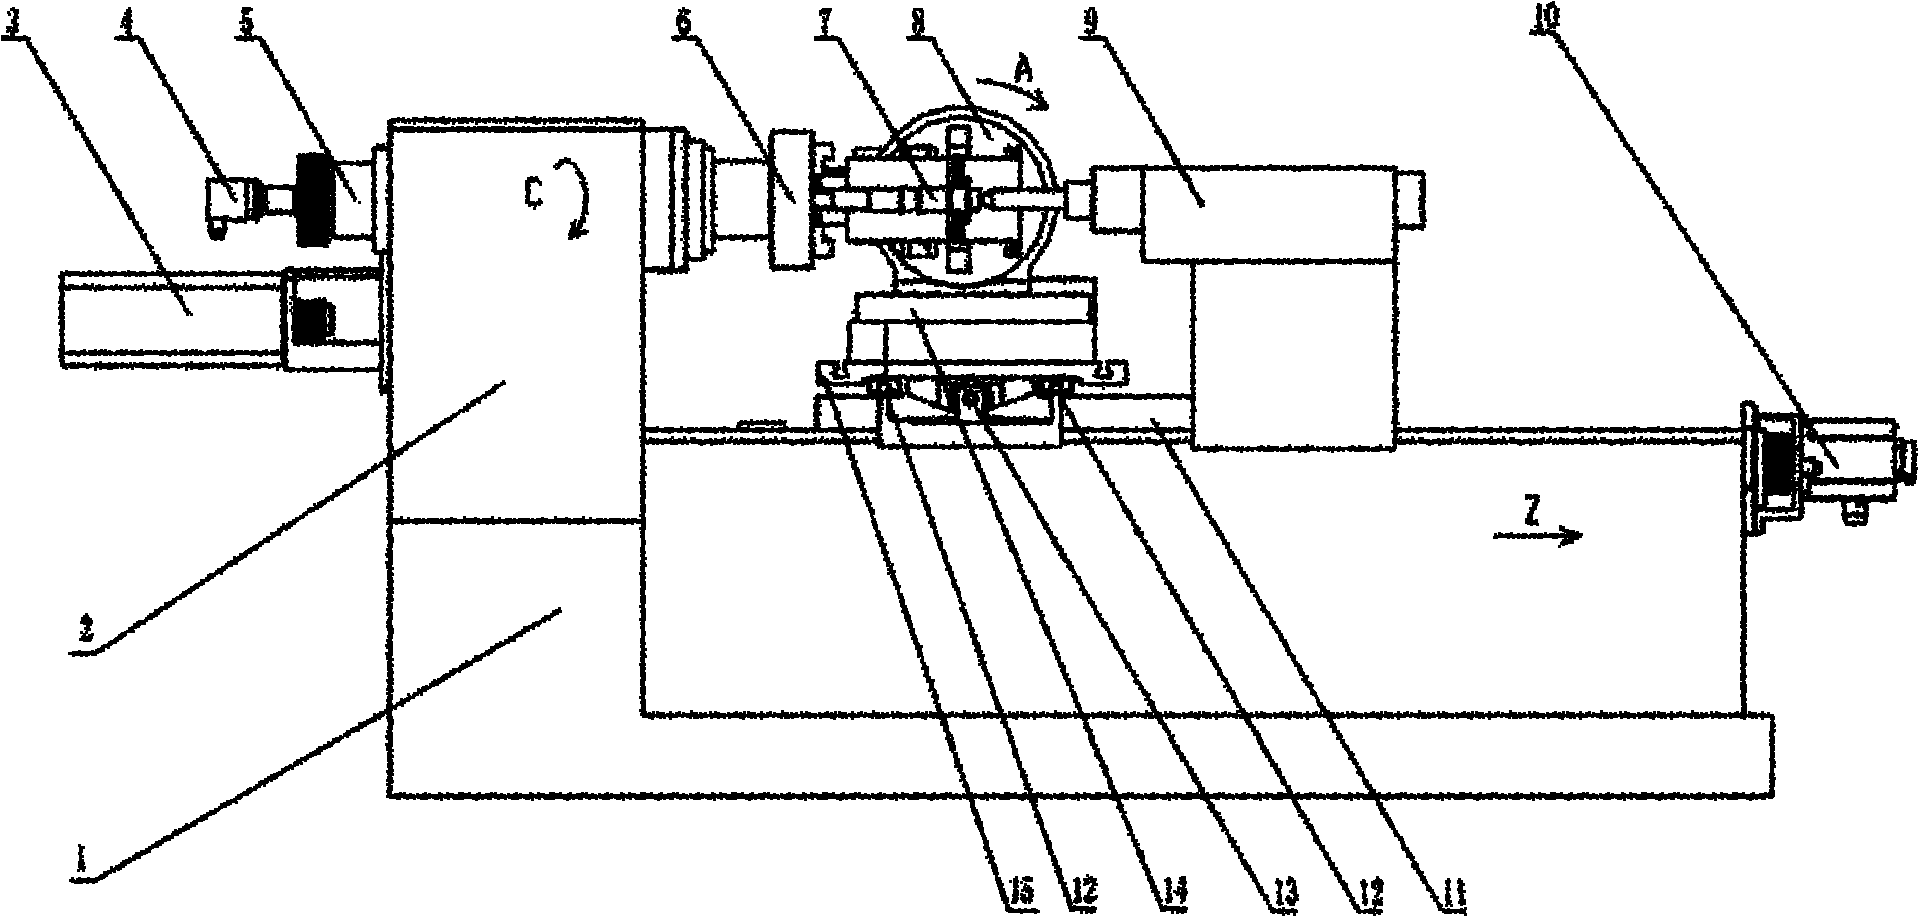 CNC (computerized numerical control) combined turning and grinding machine tool for four-linkage enveloping worms and processing method thereof